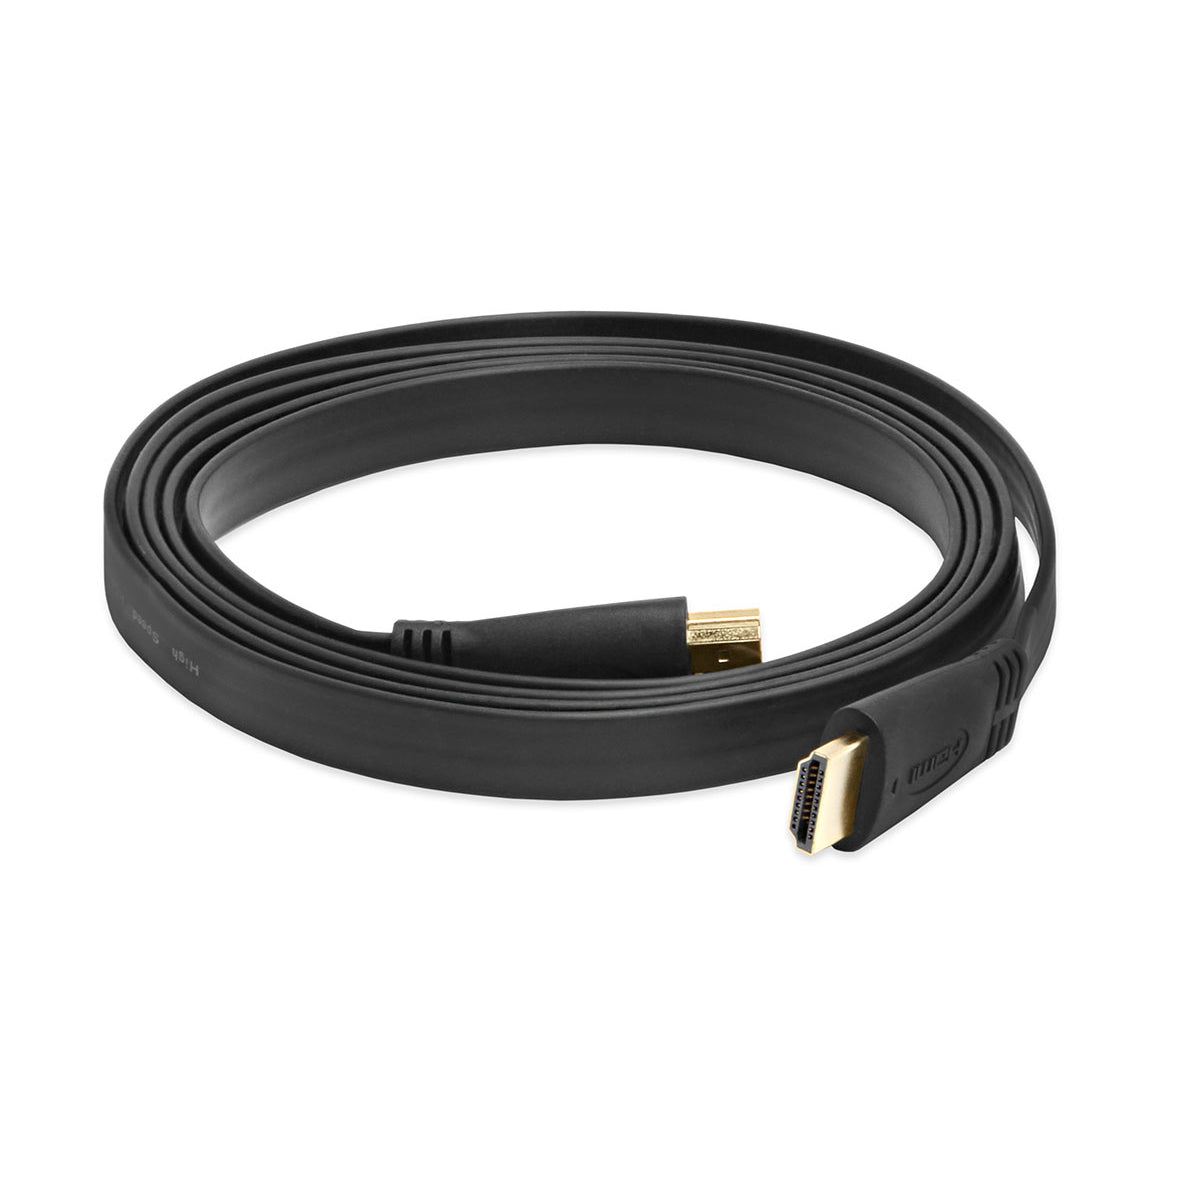 HDMI 4k 2m Flat Cable with Ethernet